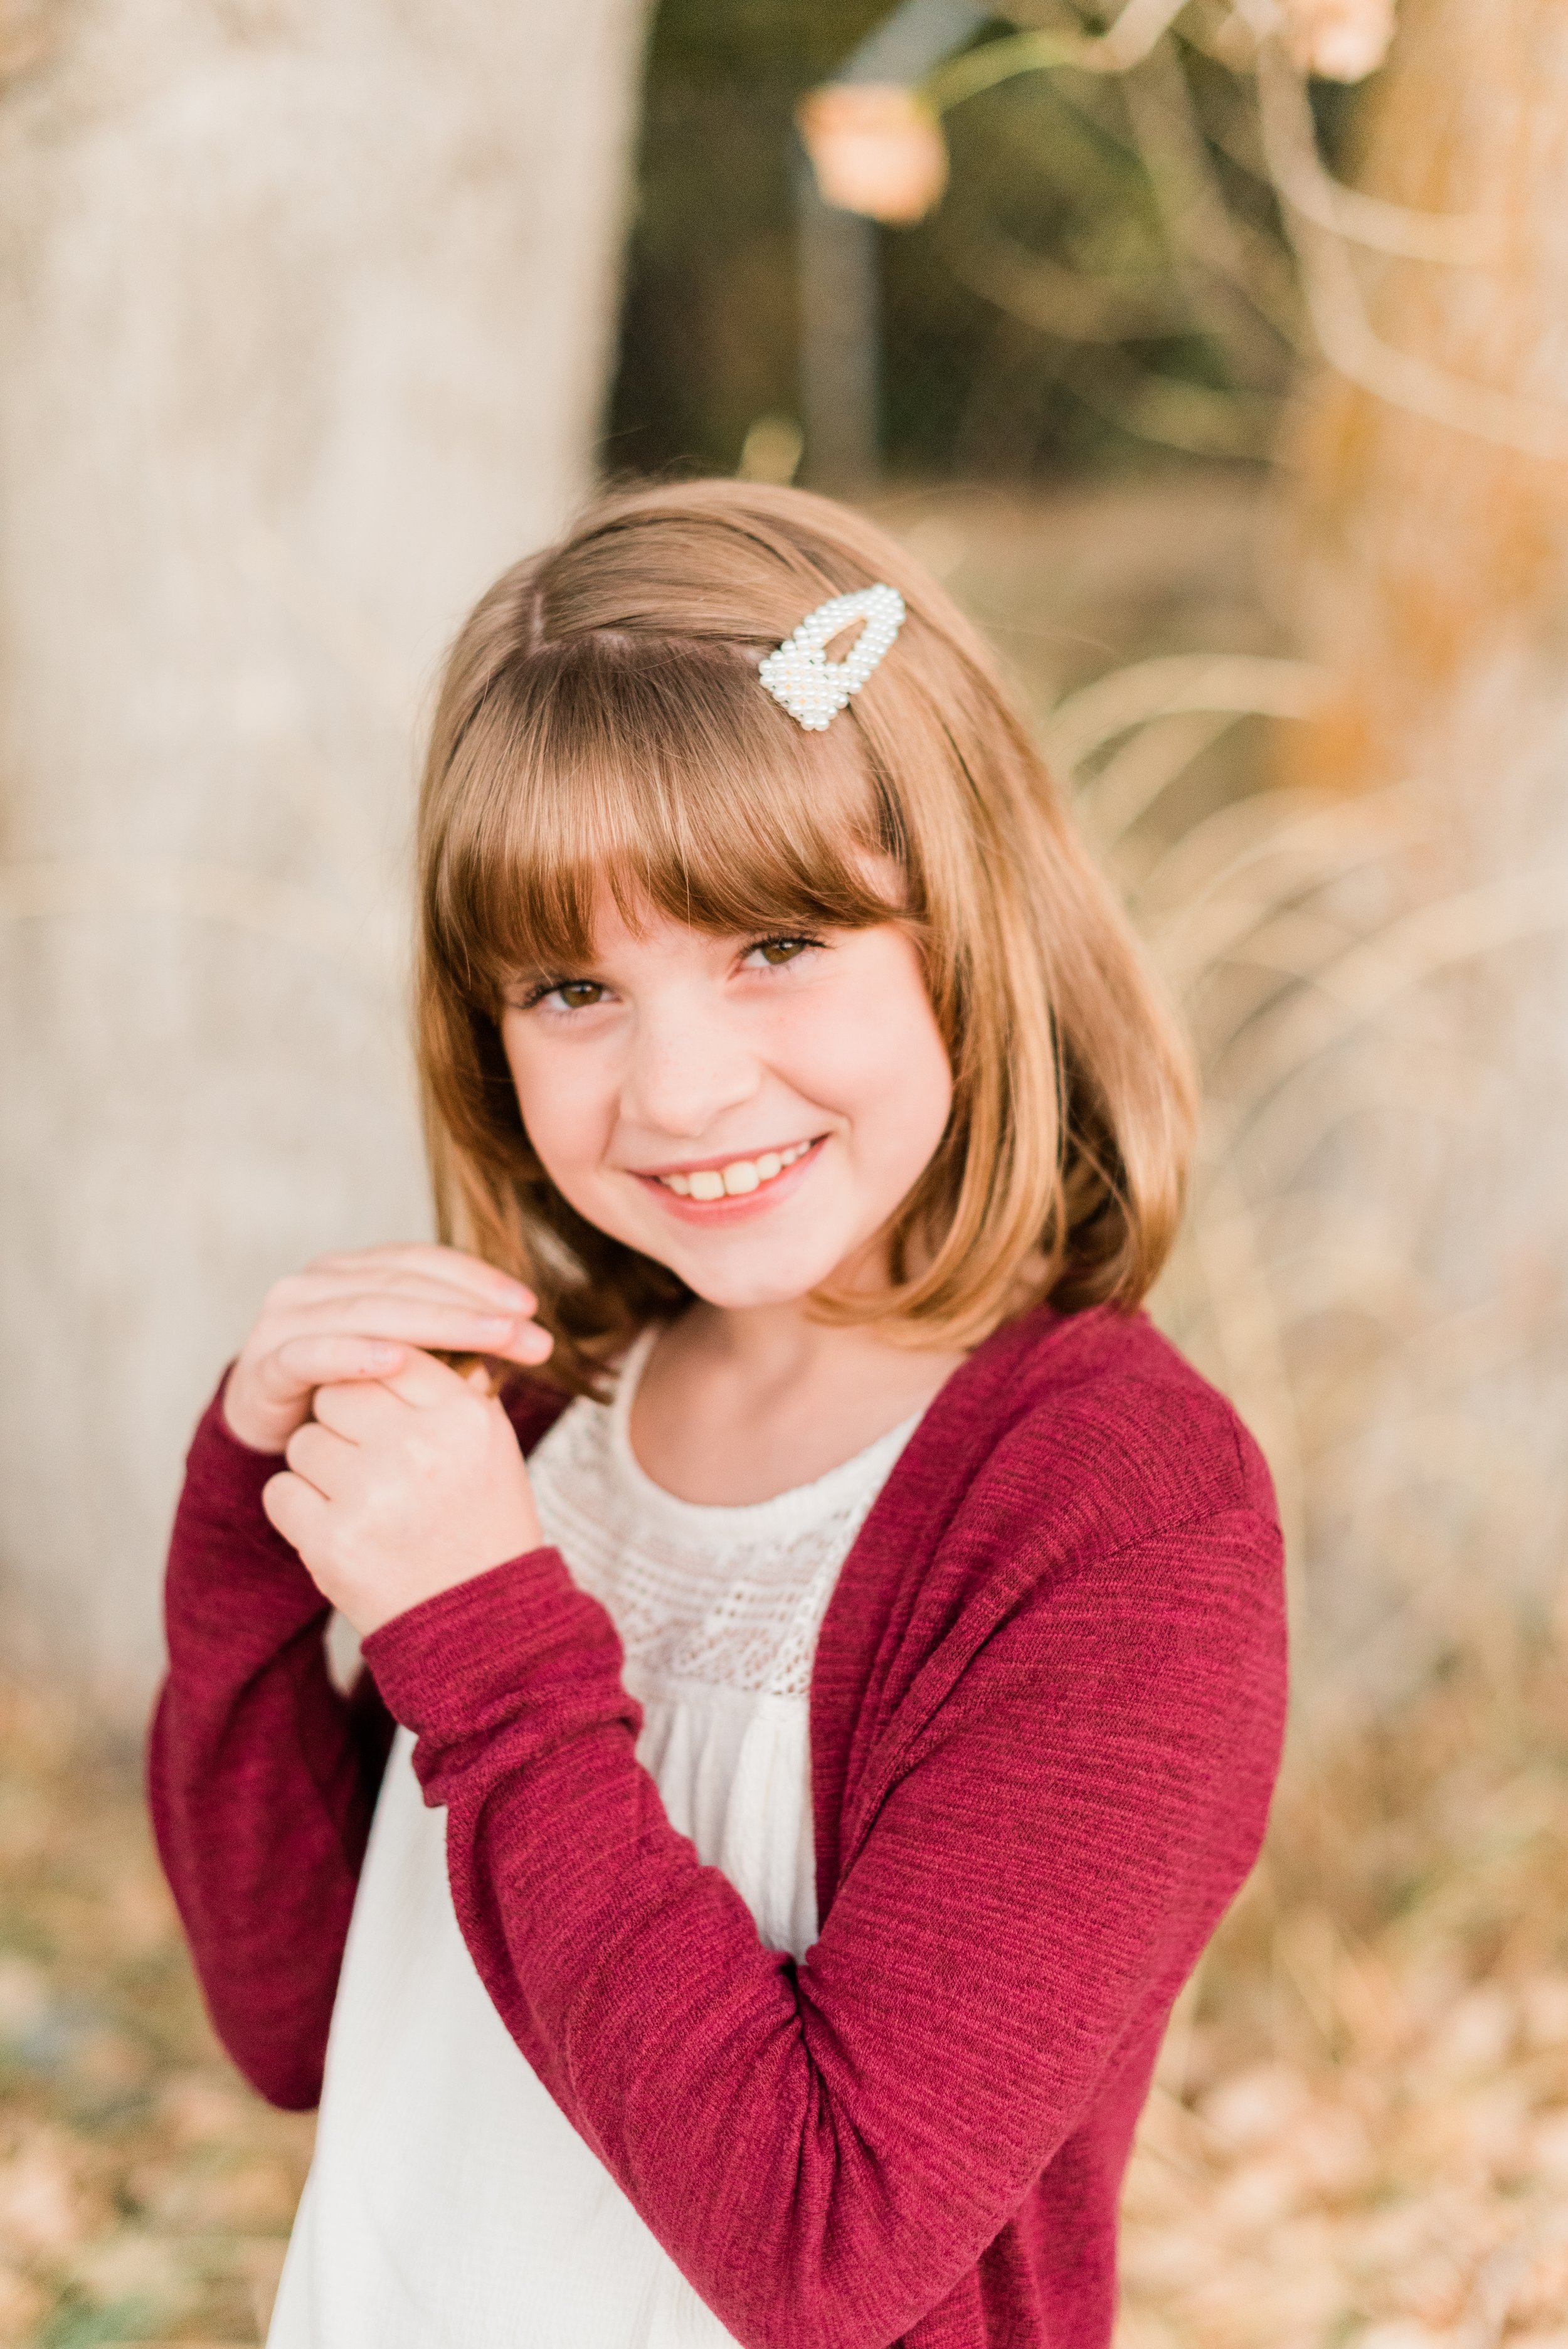  A cute little girl with brown hair and bangs poses naturally for a first-day-of-school photo captured by Atlanta-based photographer, Jacquie Erickson. Posing guide Newnan GA momtog course &nbsp; #diyphotography #firstdayofschoolphotos #capturethemom